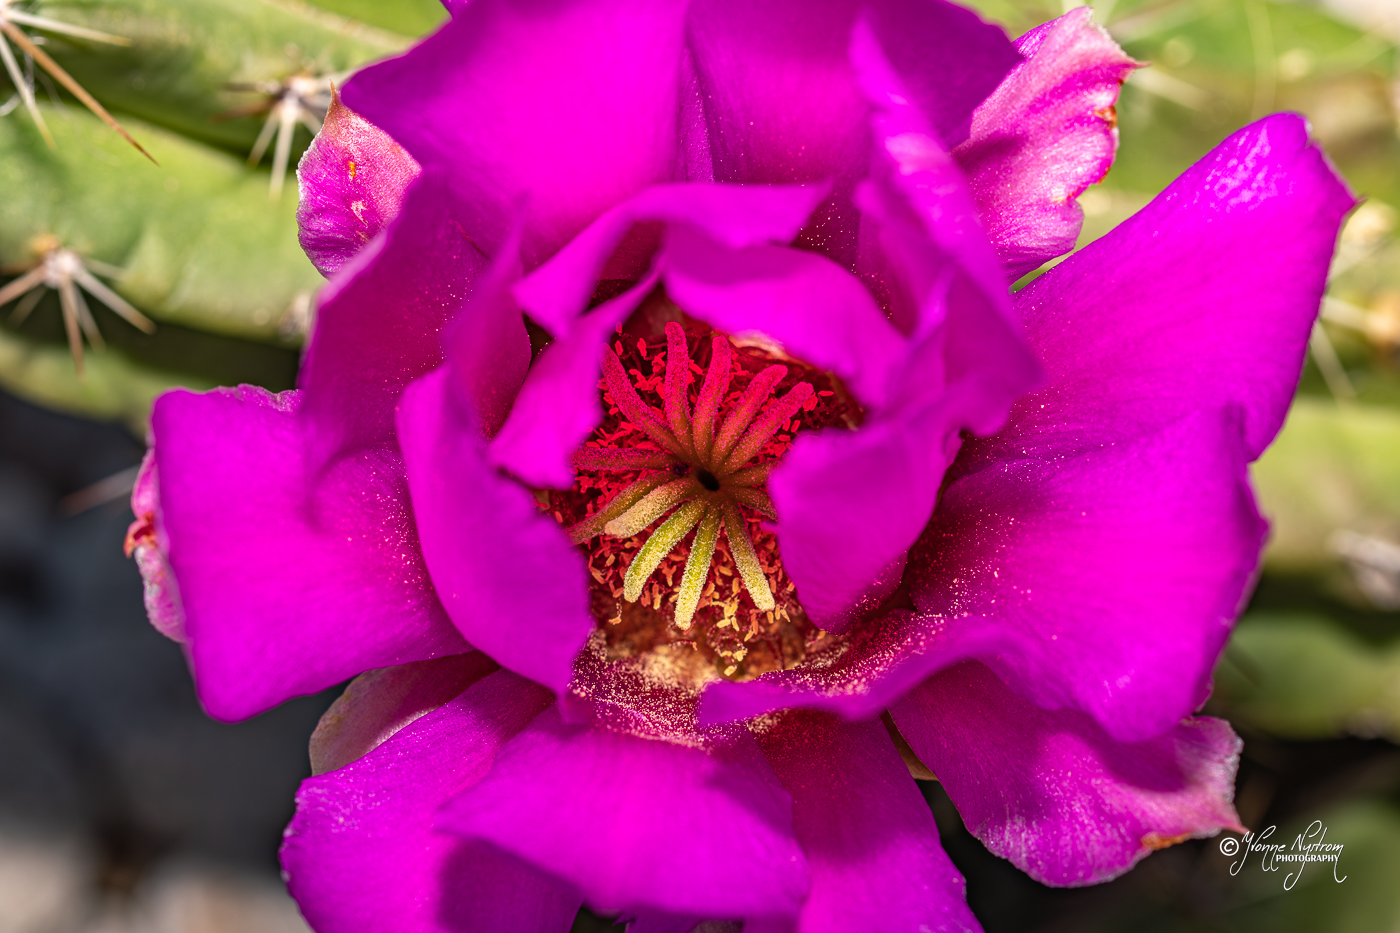 PURPLE CACTUS FLOWER by Yvonne Nystrom